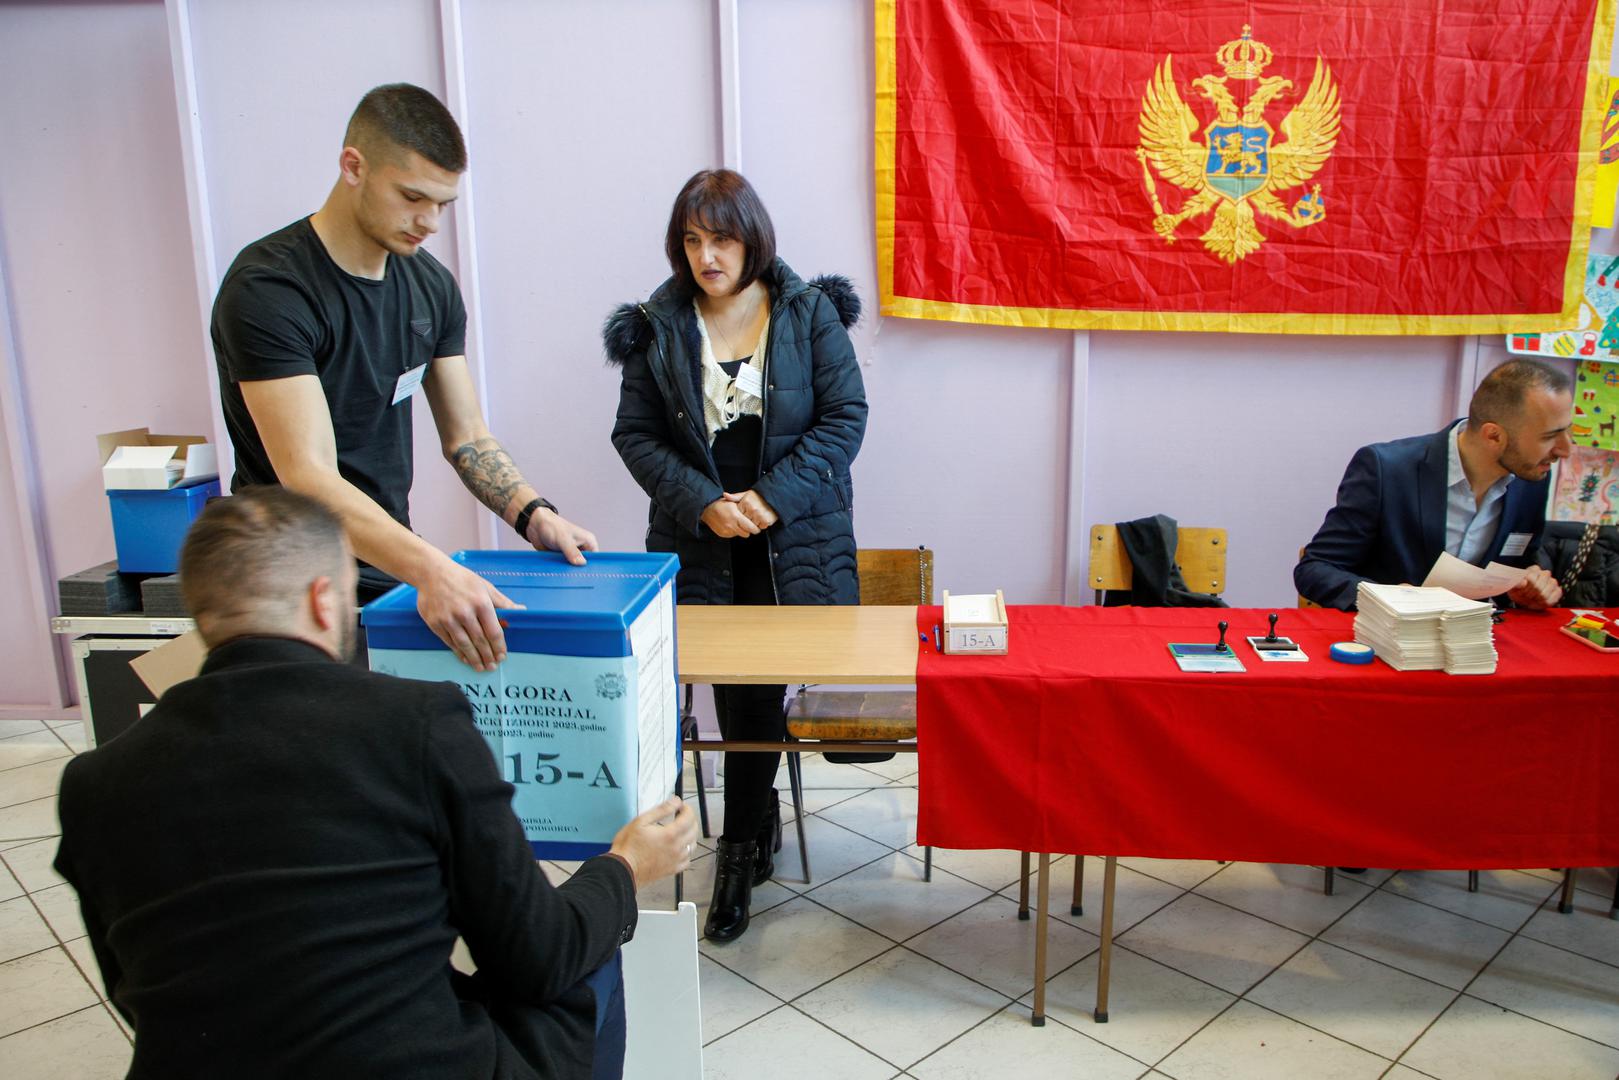 Members of the electoral commission prepare a ballot box at a polling station during the presidential elections in Podgorica, Montenegro, March 19, 2023. REUTERS/Stevo Vasiljevic Photo: STEVO VASILJEVIC/REUTERS